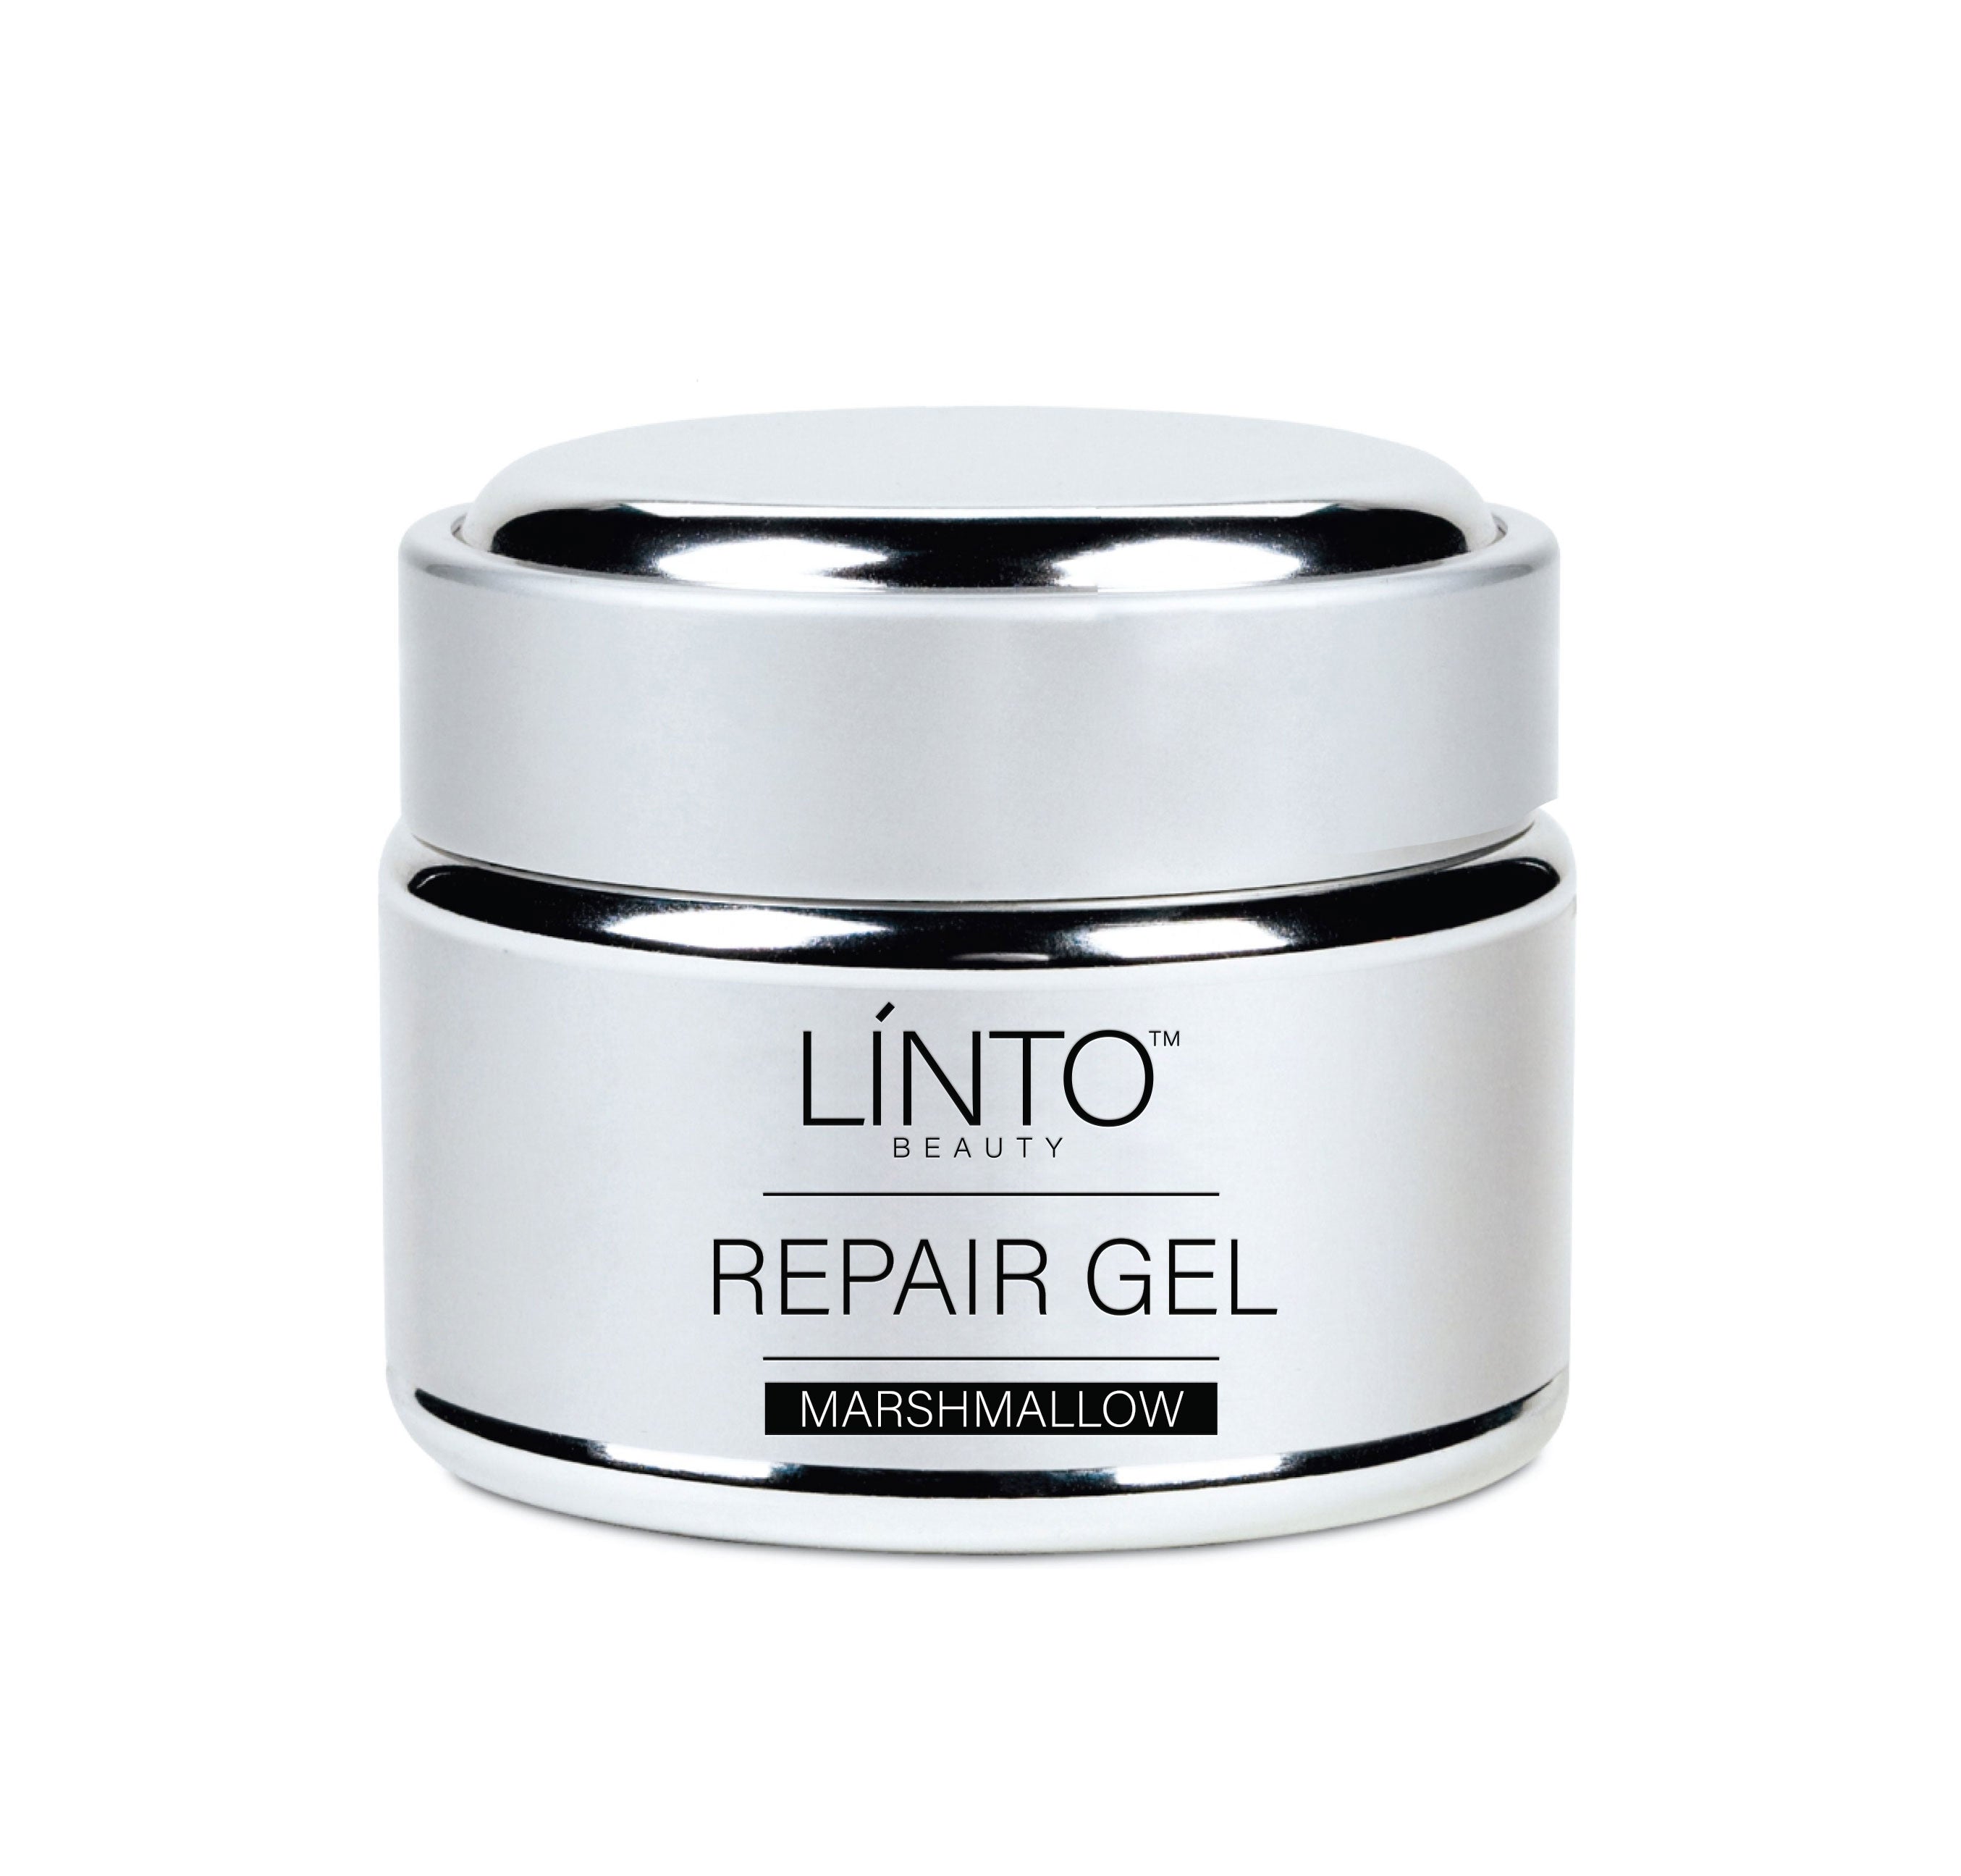 Repair gel marshmallow by LiNTO